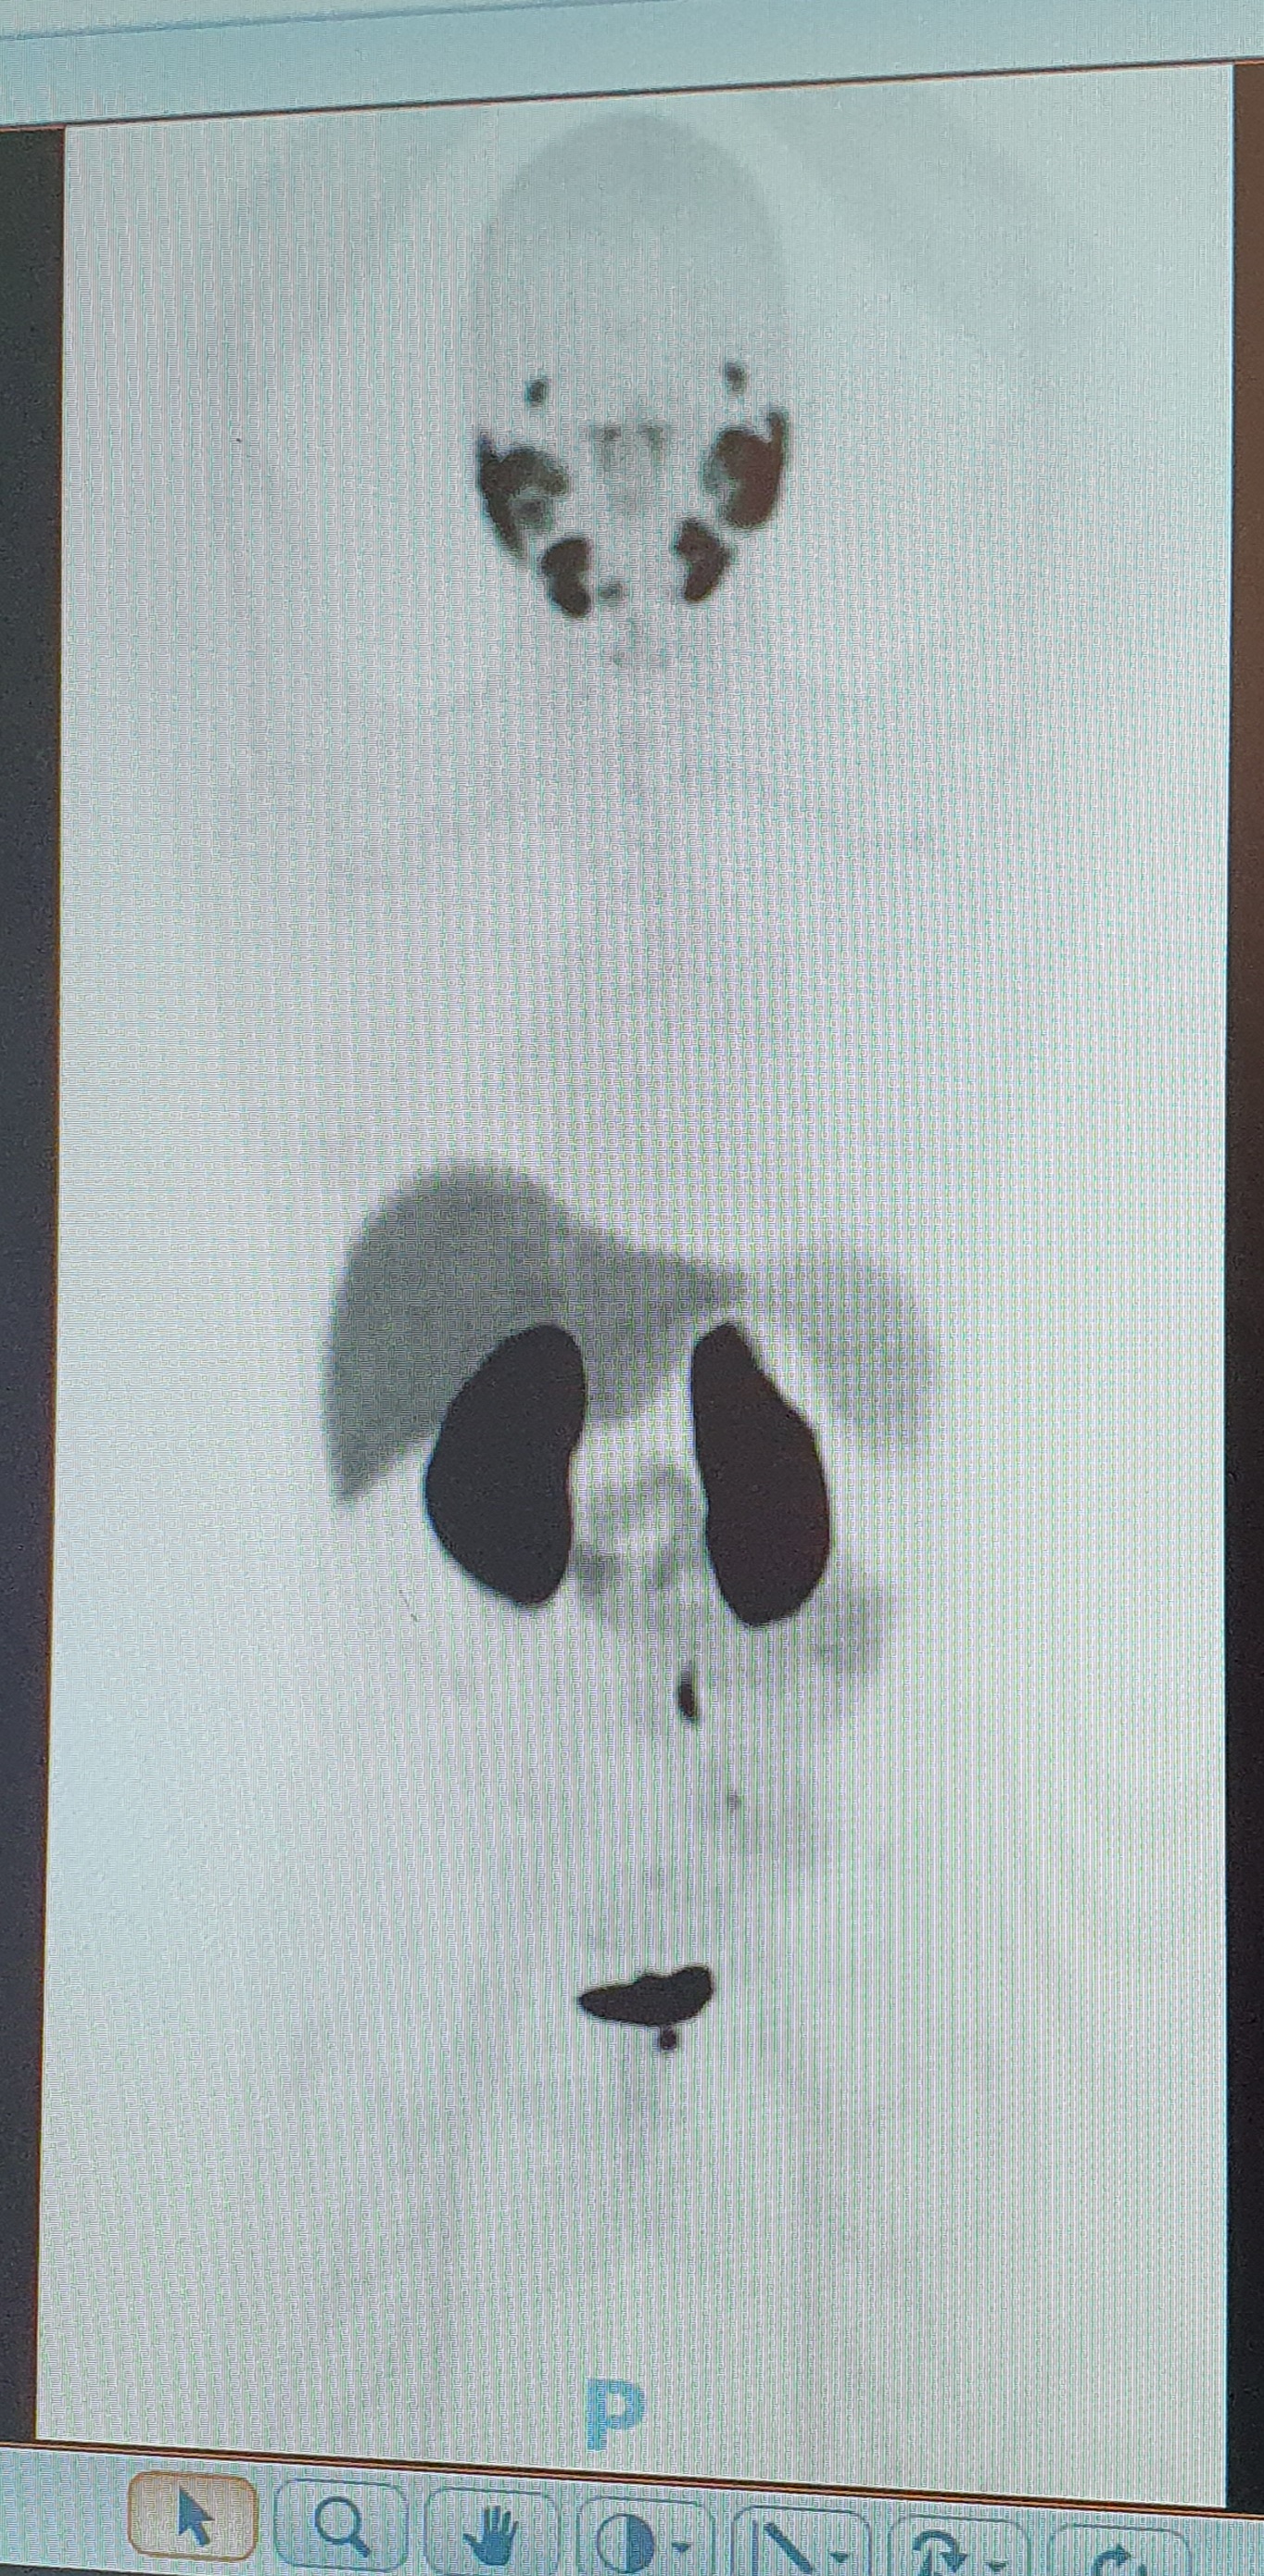 PET scan image on computer monitor showing various organs and tumour